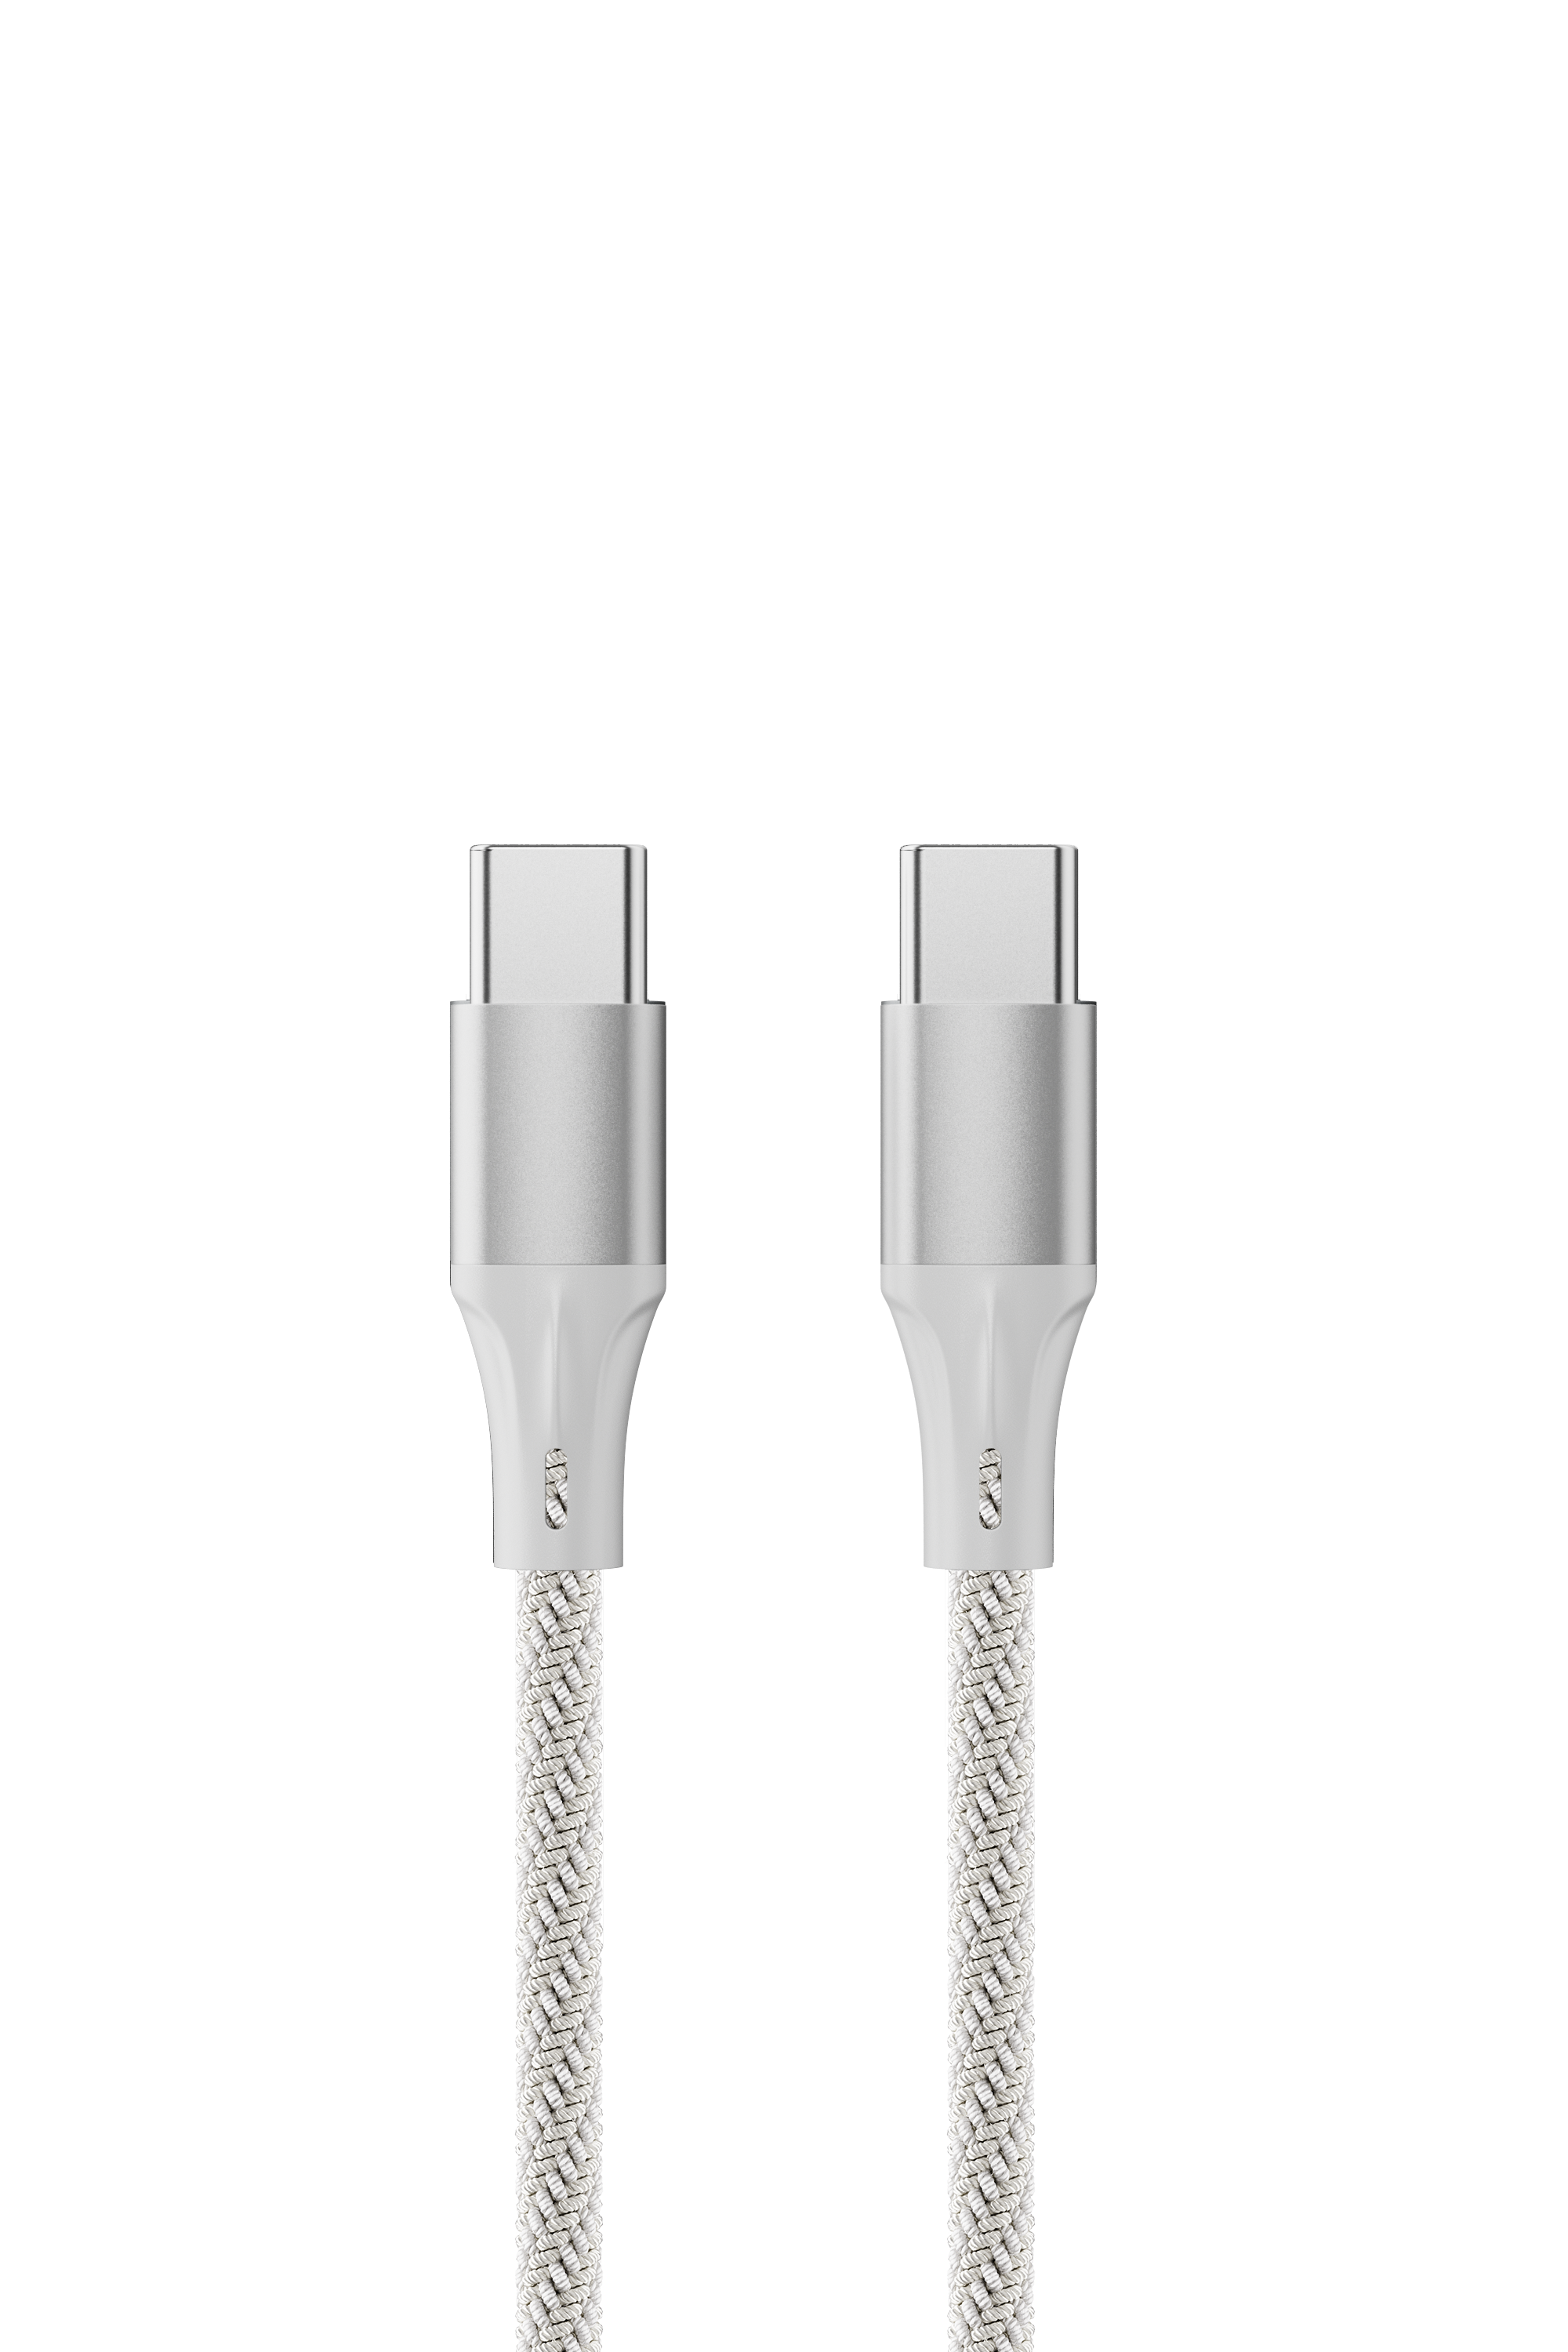 USB Type-C to USB Type-C Cable, Accesstyle, 0.3m, White